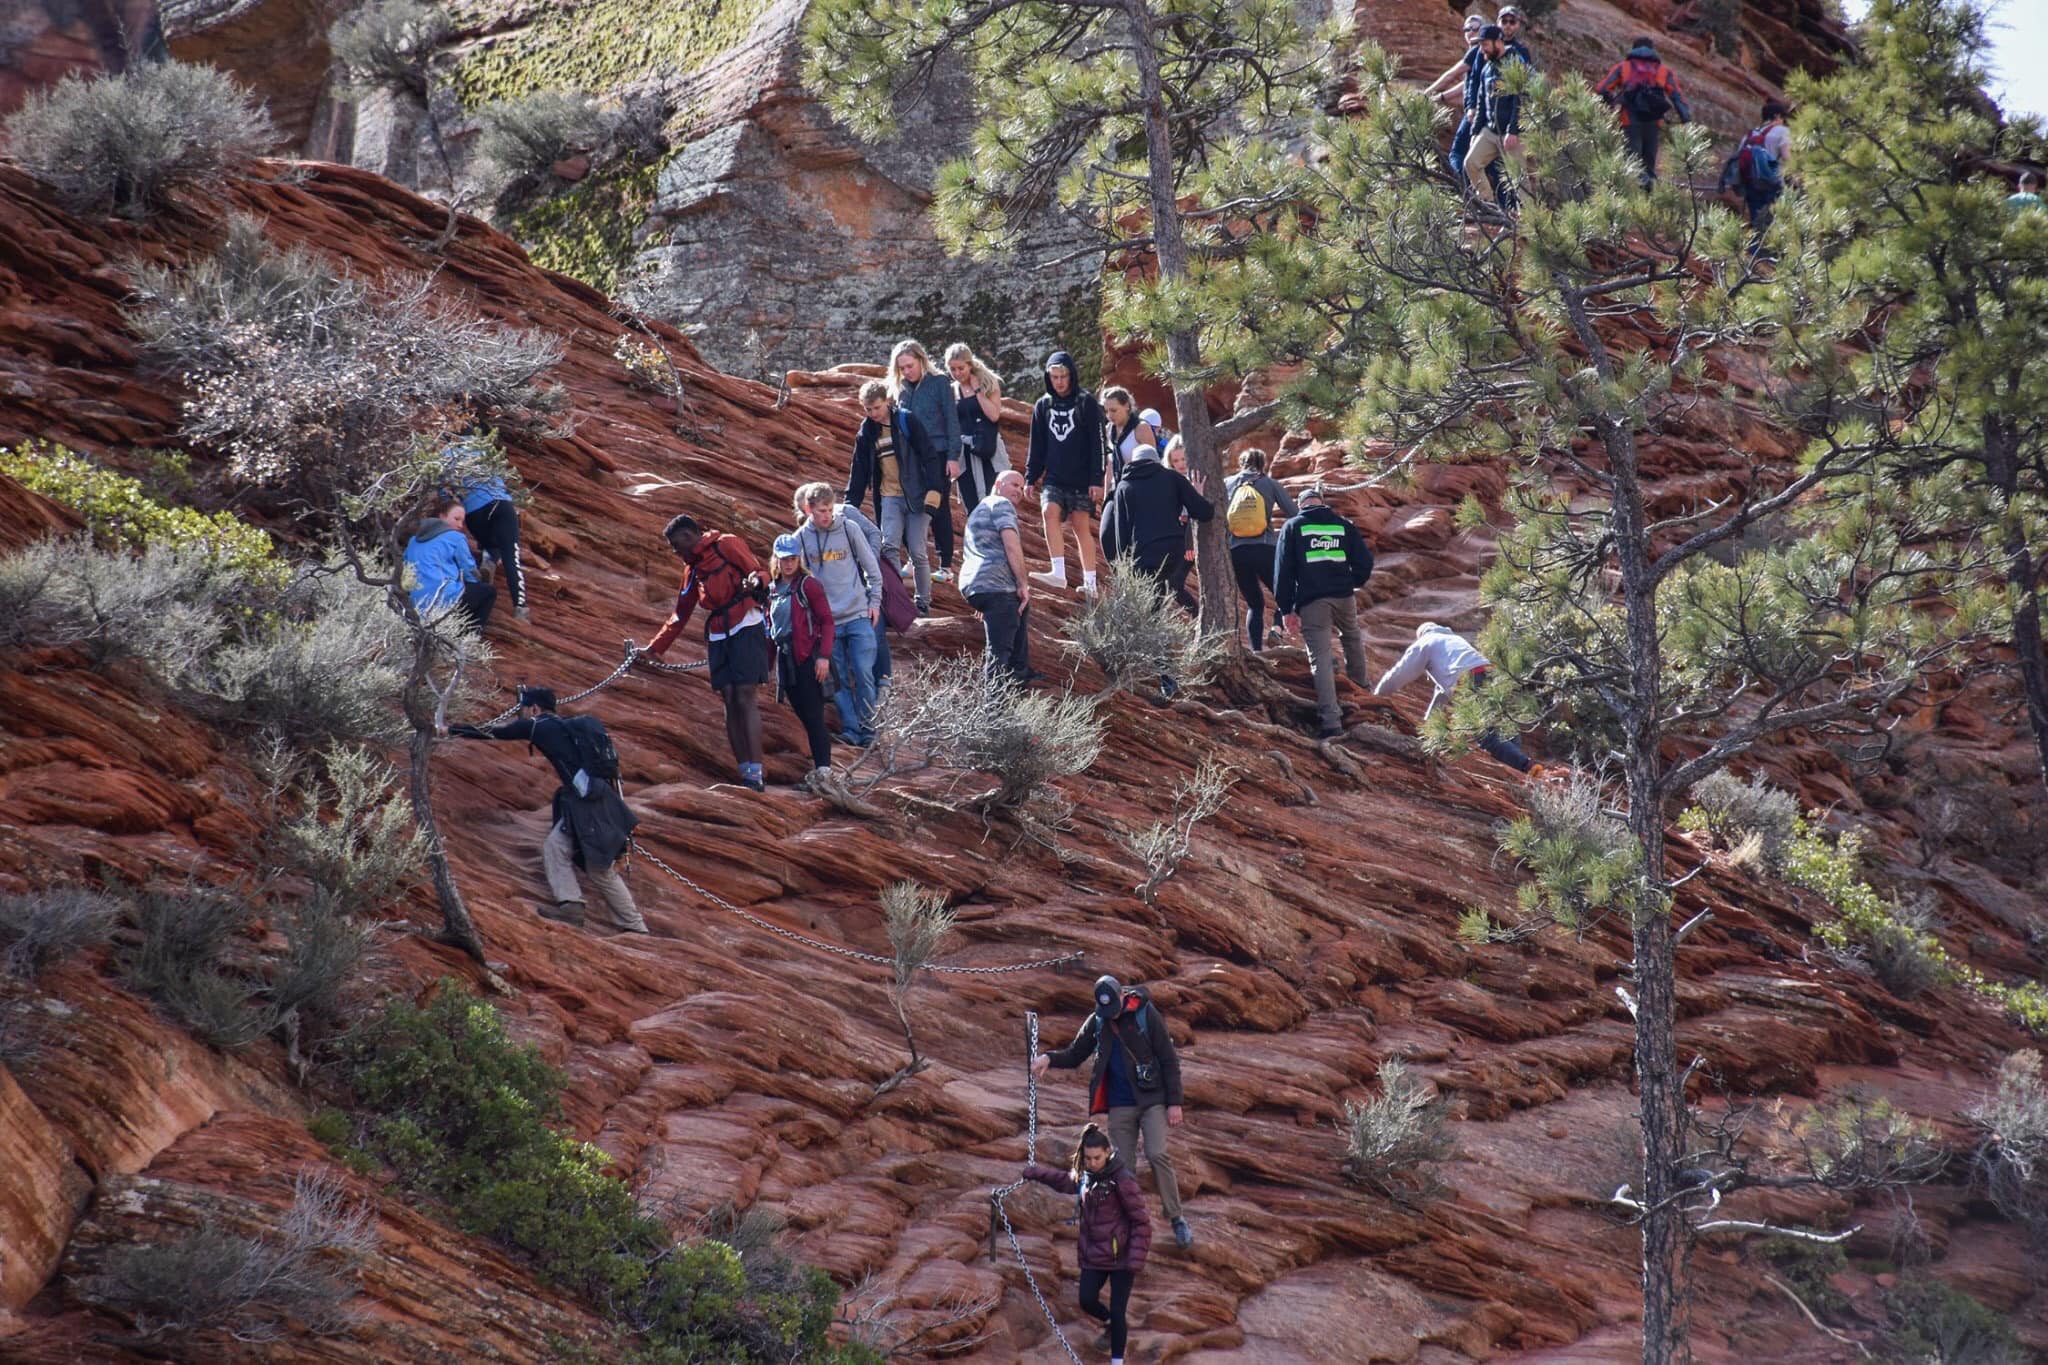 PHOTO: People crowd together while navigating a narrow hiking trail at Zion National Park in Utah, March 21, 2020, in a photo shared via Twitter by the National Park Service.